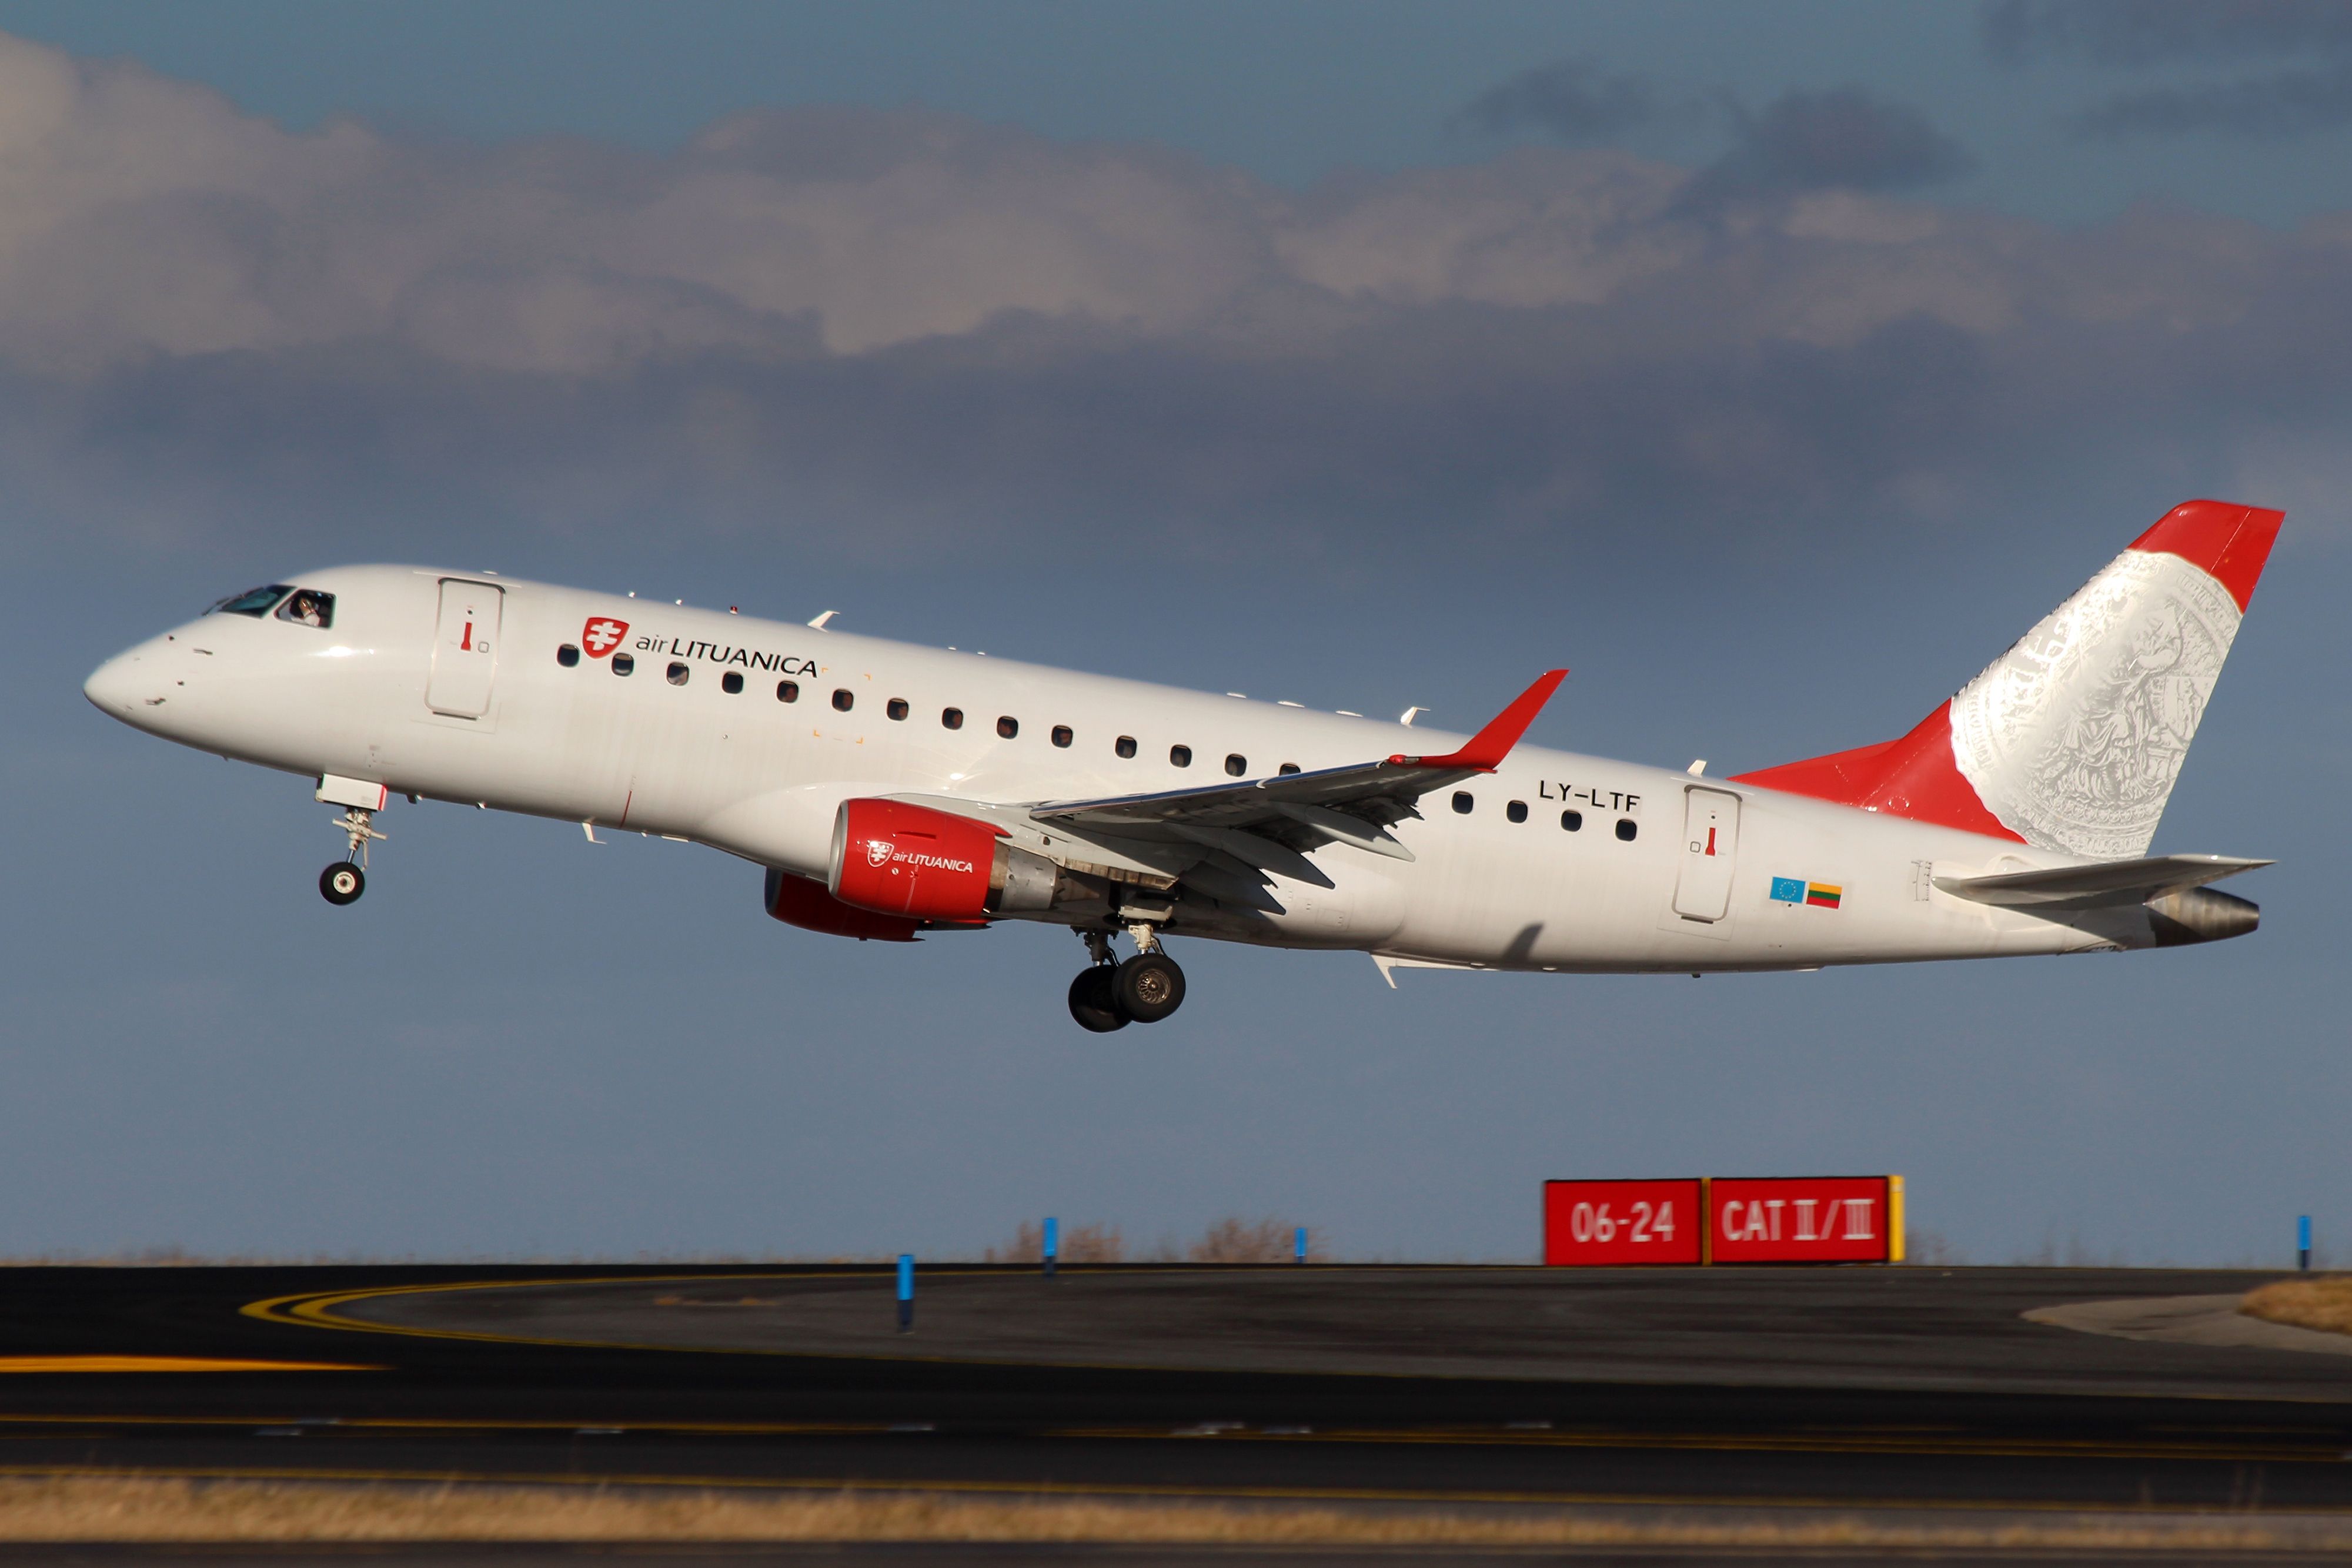 An Air Lituanica Embraer jet taking off